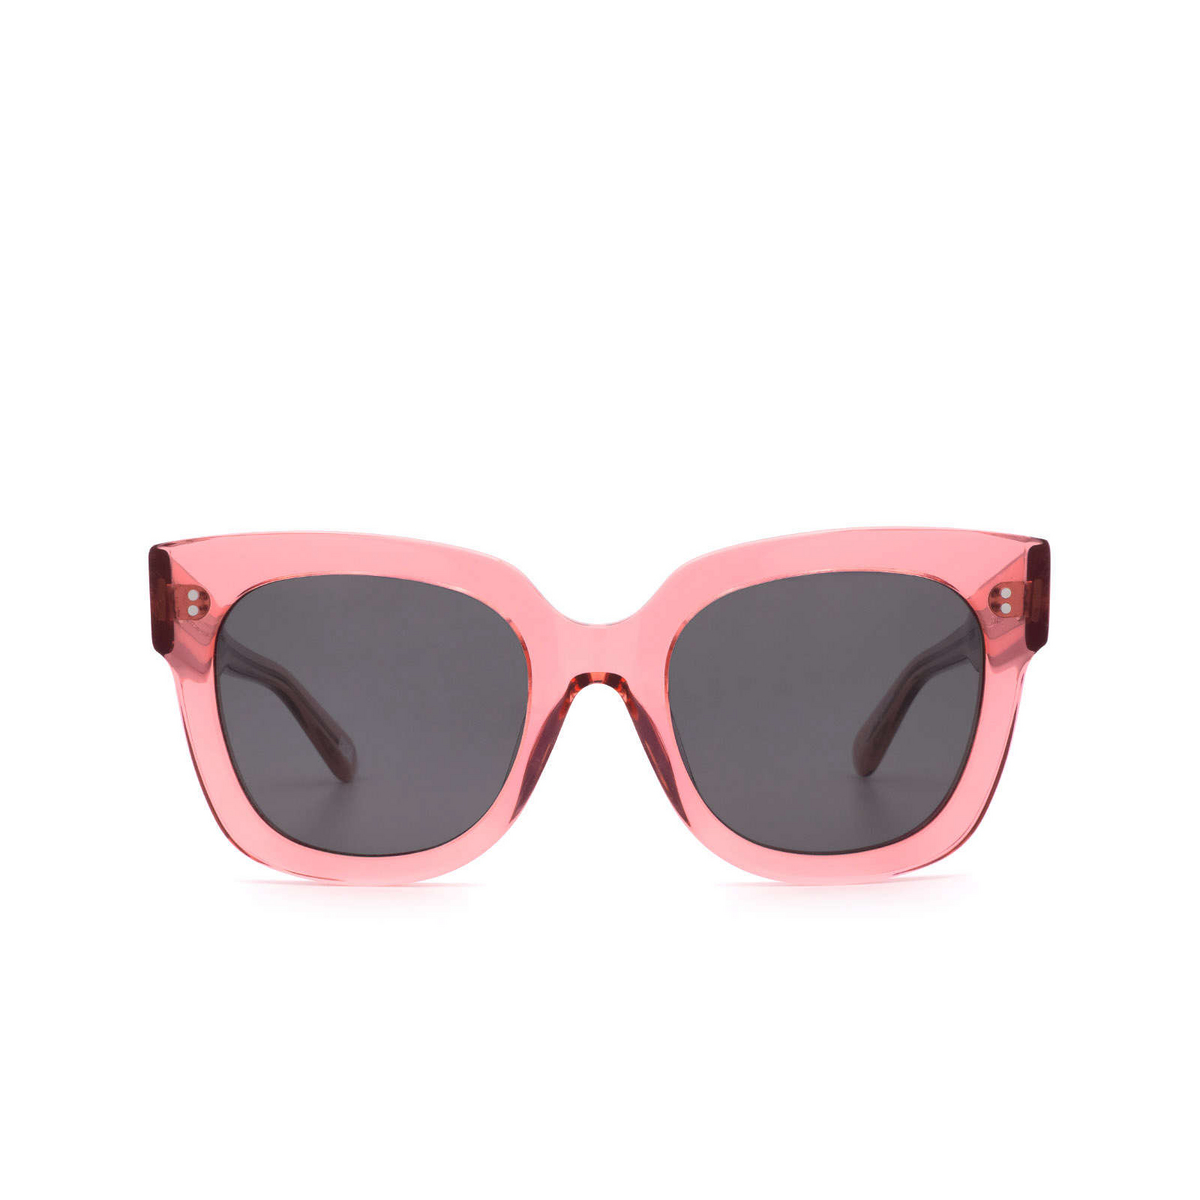 Chimi #008 Sunglasses GUAVA Pink - front view